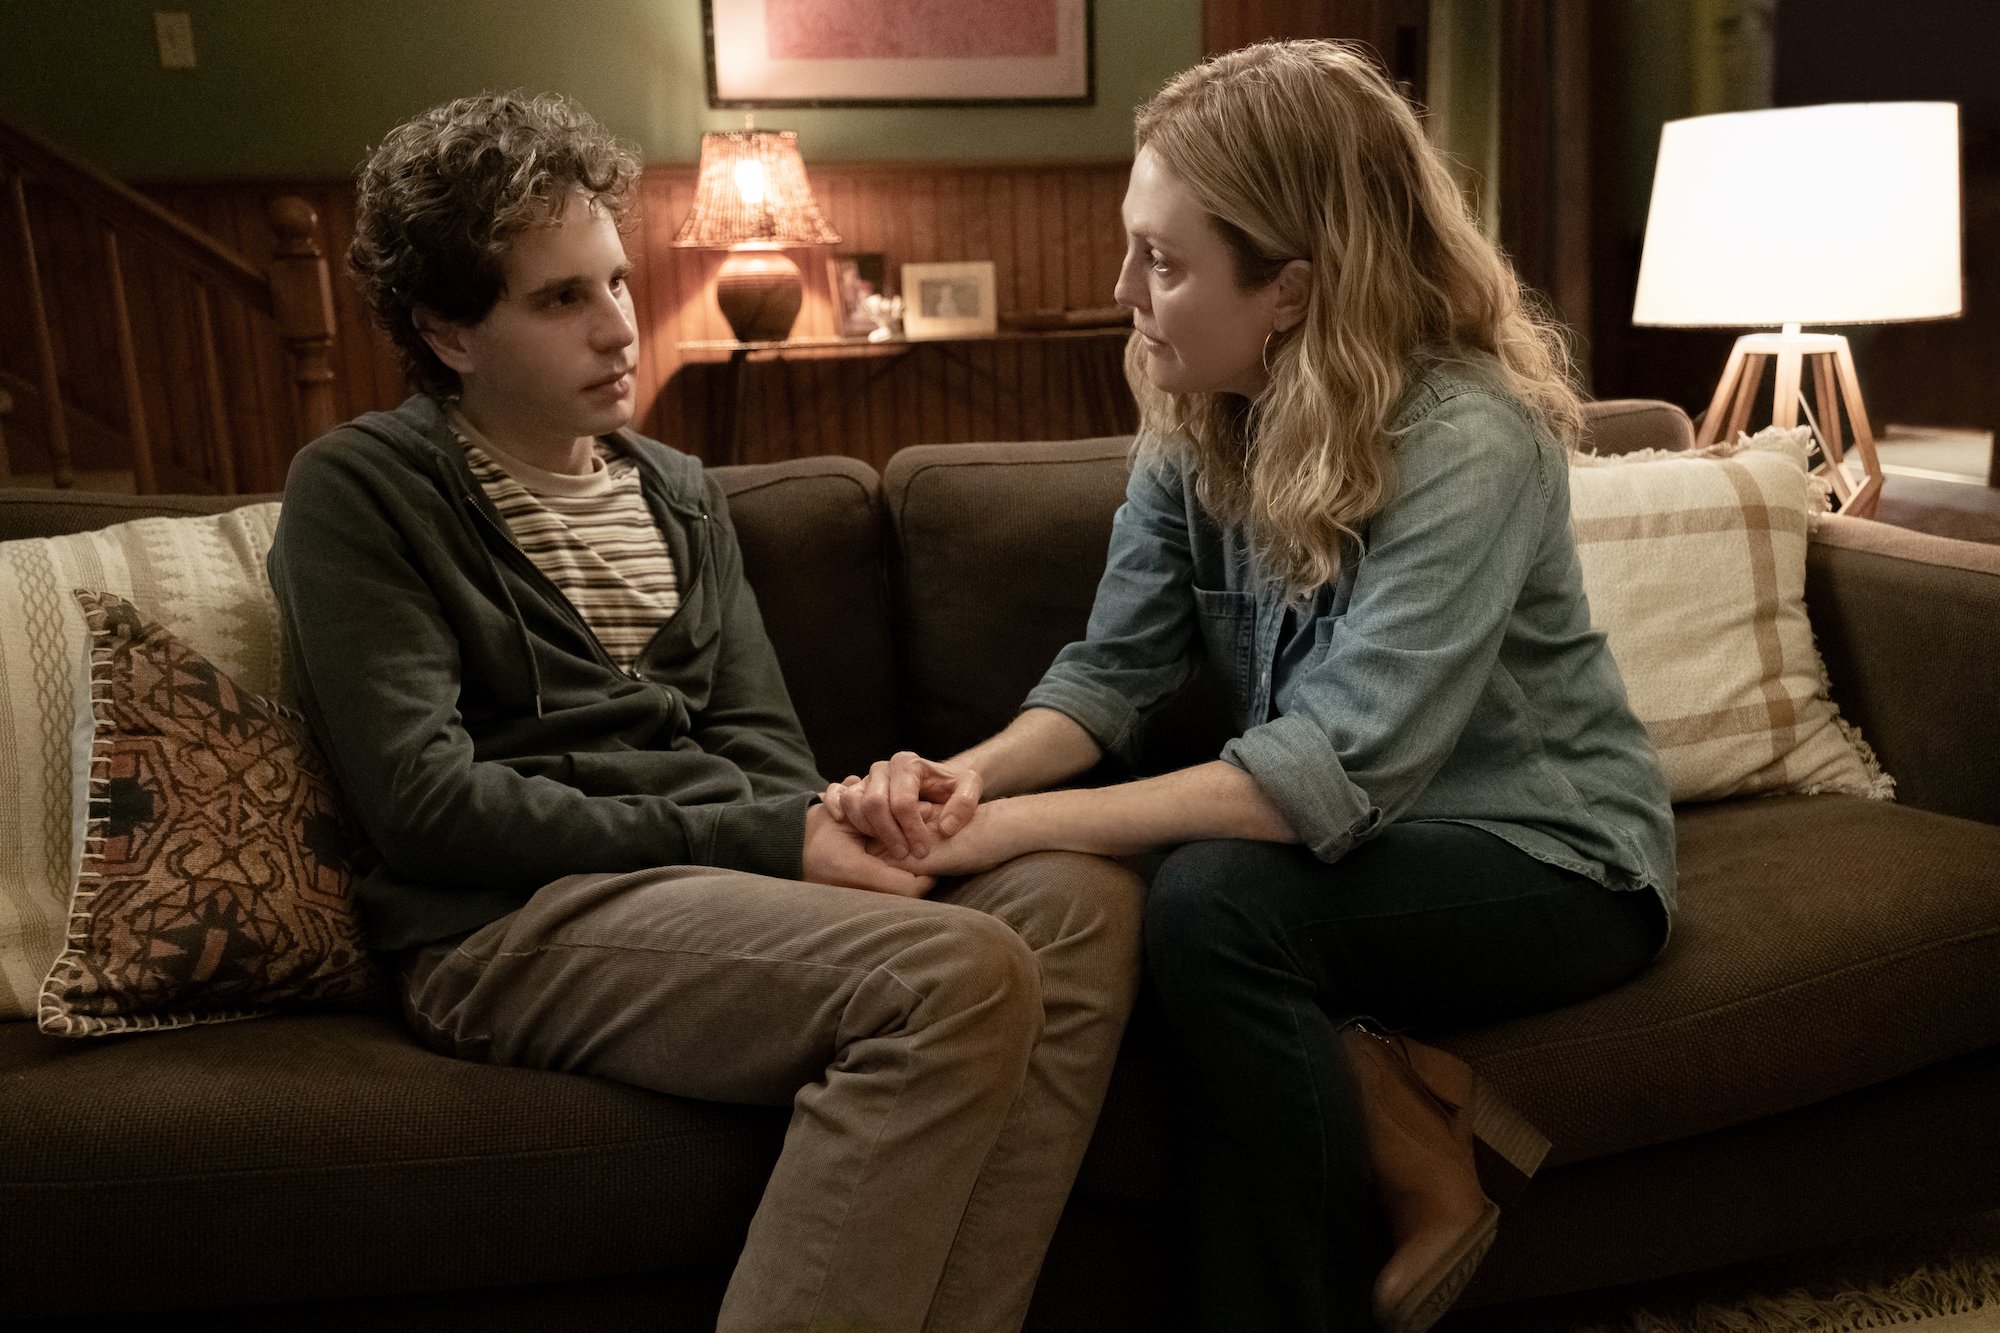 Julianne Moore comforts Ben Platt in the 'Dear Evan Hansen' movie. They sit on a brown couch, Moore's hands clasping Platt's. Moore wears a light blue denim button-up shirt with jeans and heeled booties. Platt wears light brown pants with a striped T-shirt and green zip-up hoodie. 